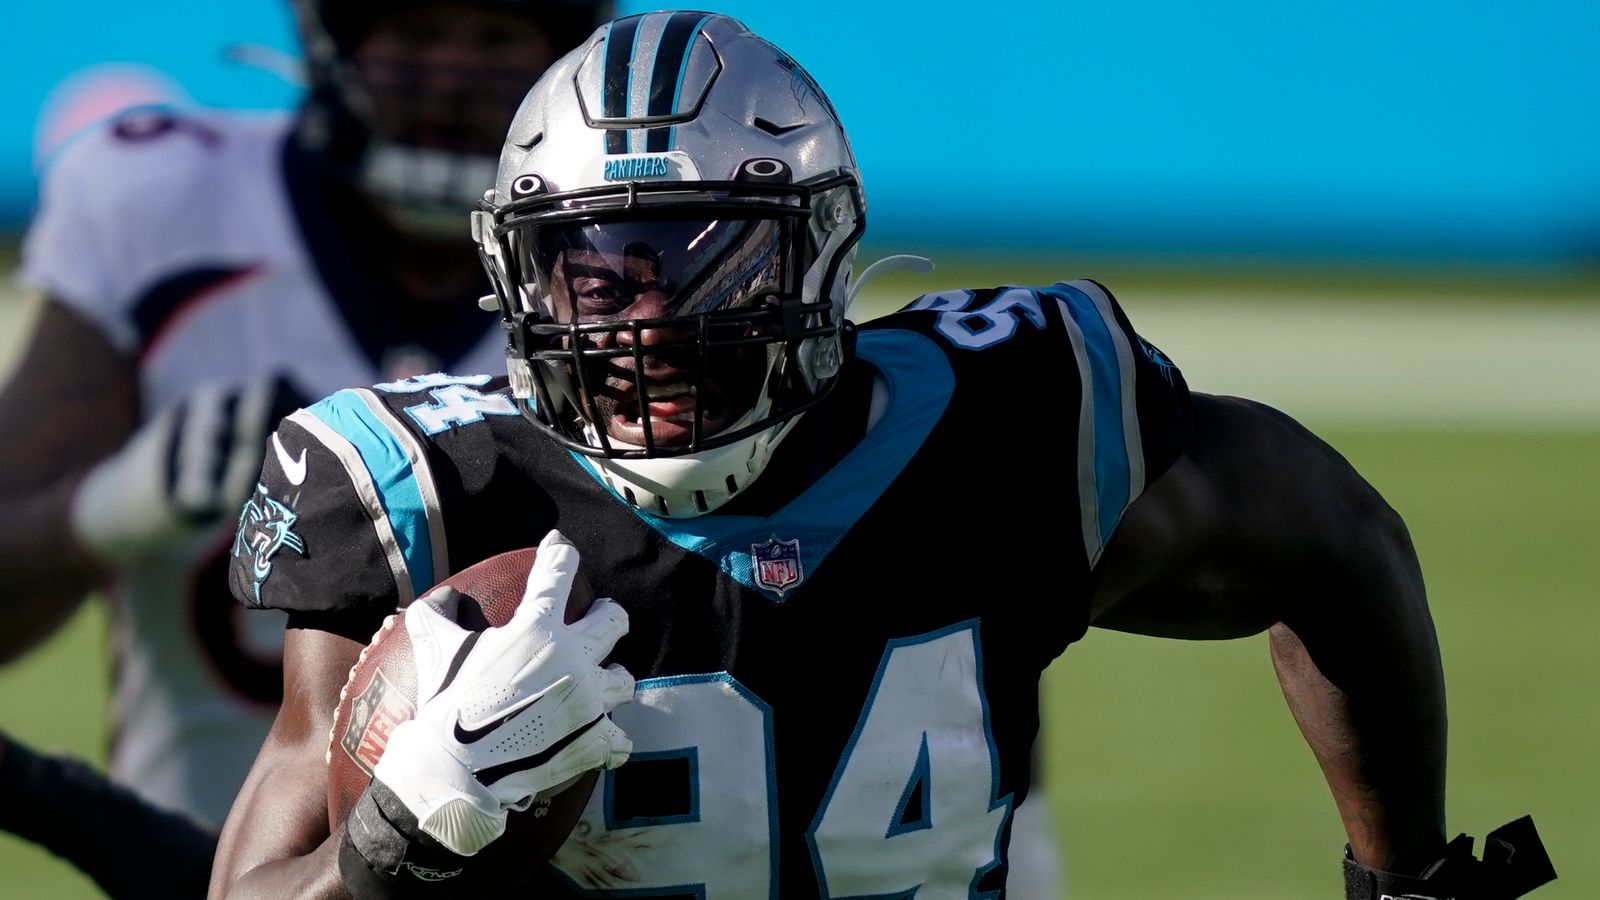 Efe Obada negotiates one-year contract with Buffalo Bills after four years with Carolina Panthers |  NFL news